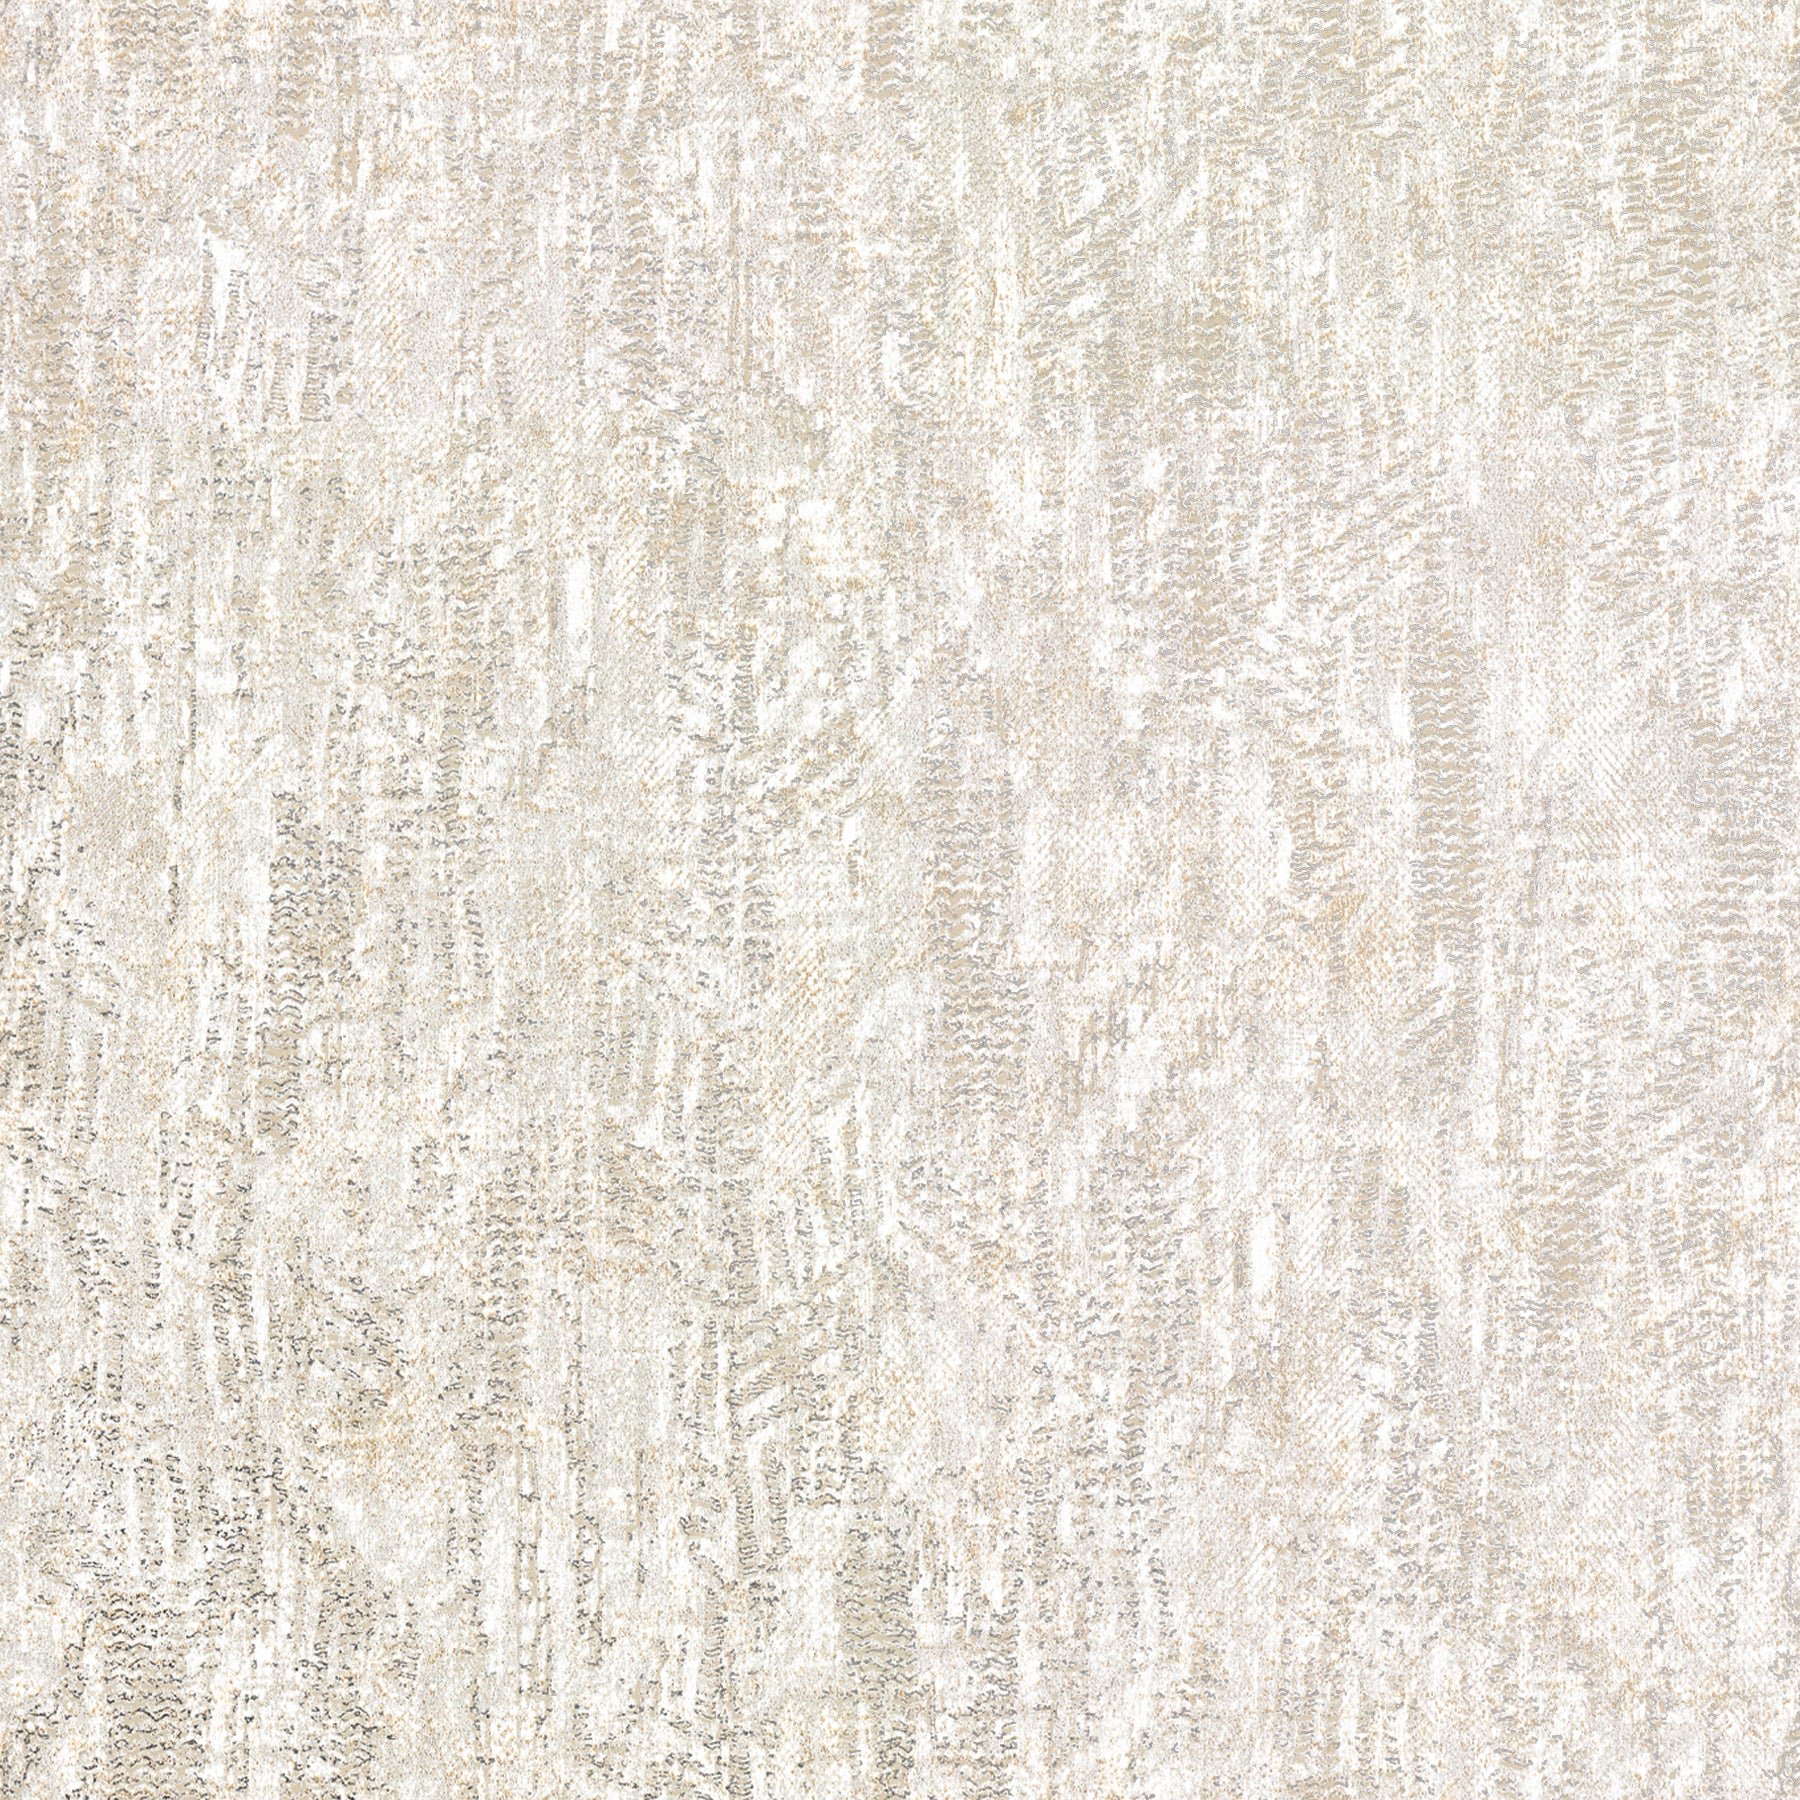 Looking 2927-20304 Polished Luster White Distressed Texture White Brewster Wallpaper